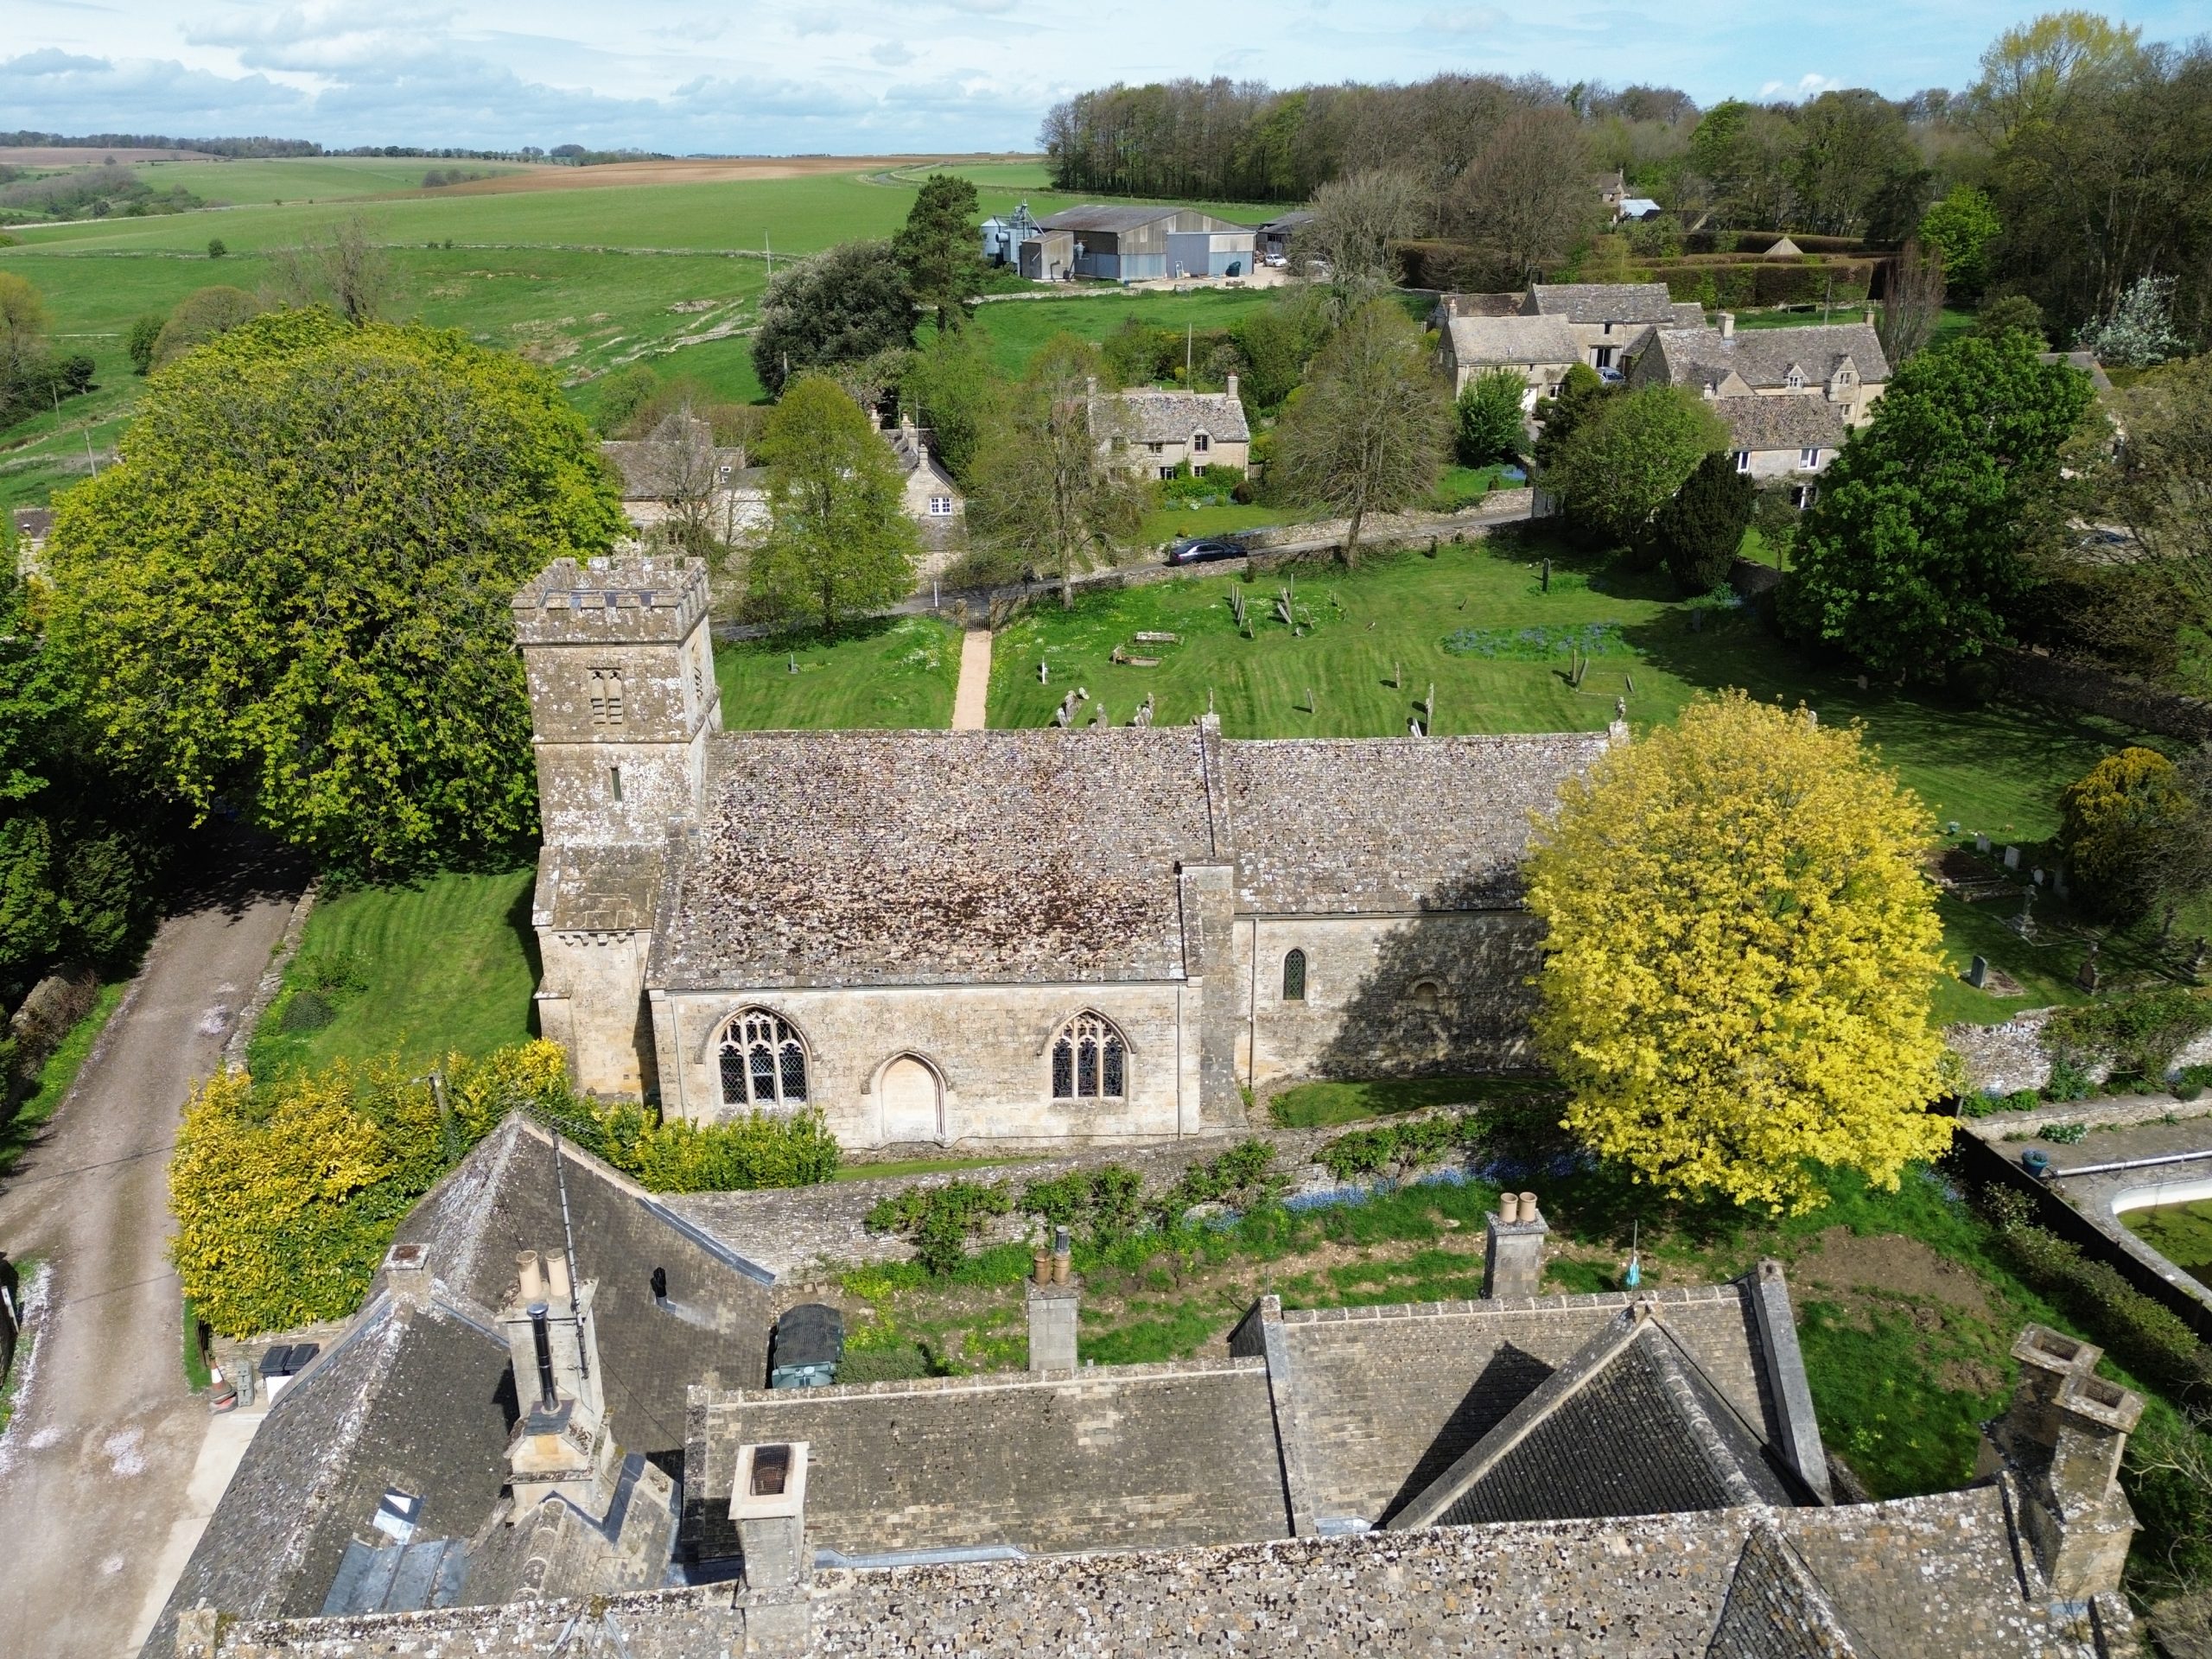 Aerial photograph of All Saints Church, Turkdean from South by drone, courtesy of Jonathan McKechnie-Jarvis